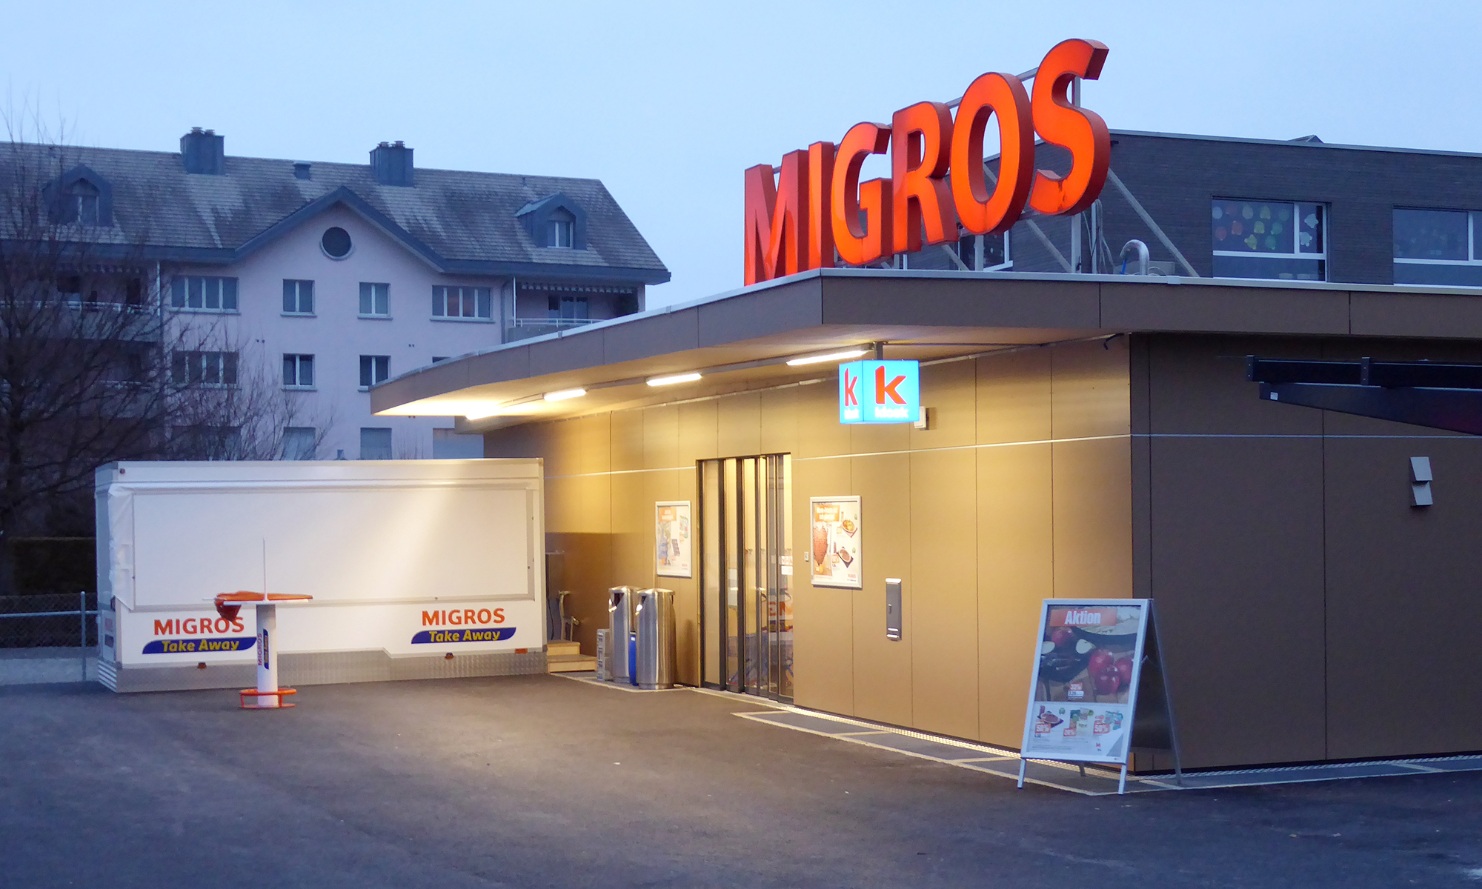 A single-storey temporary timber construction at dusk with the Migros neon sign on the roof.